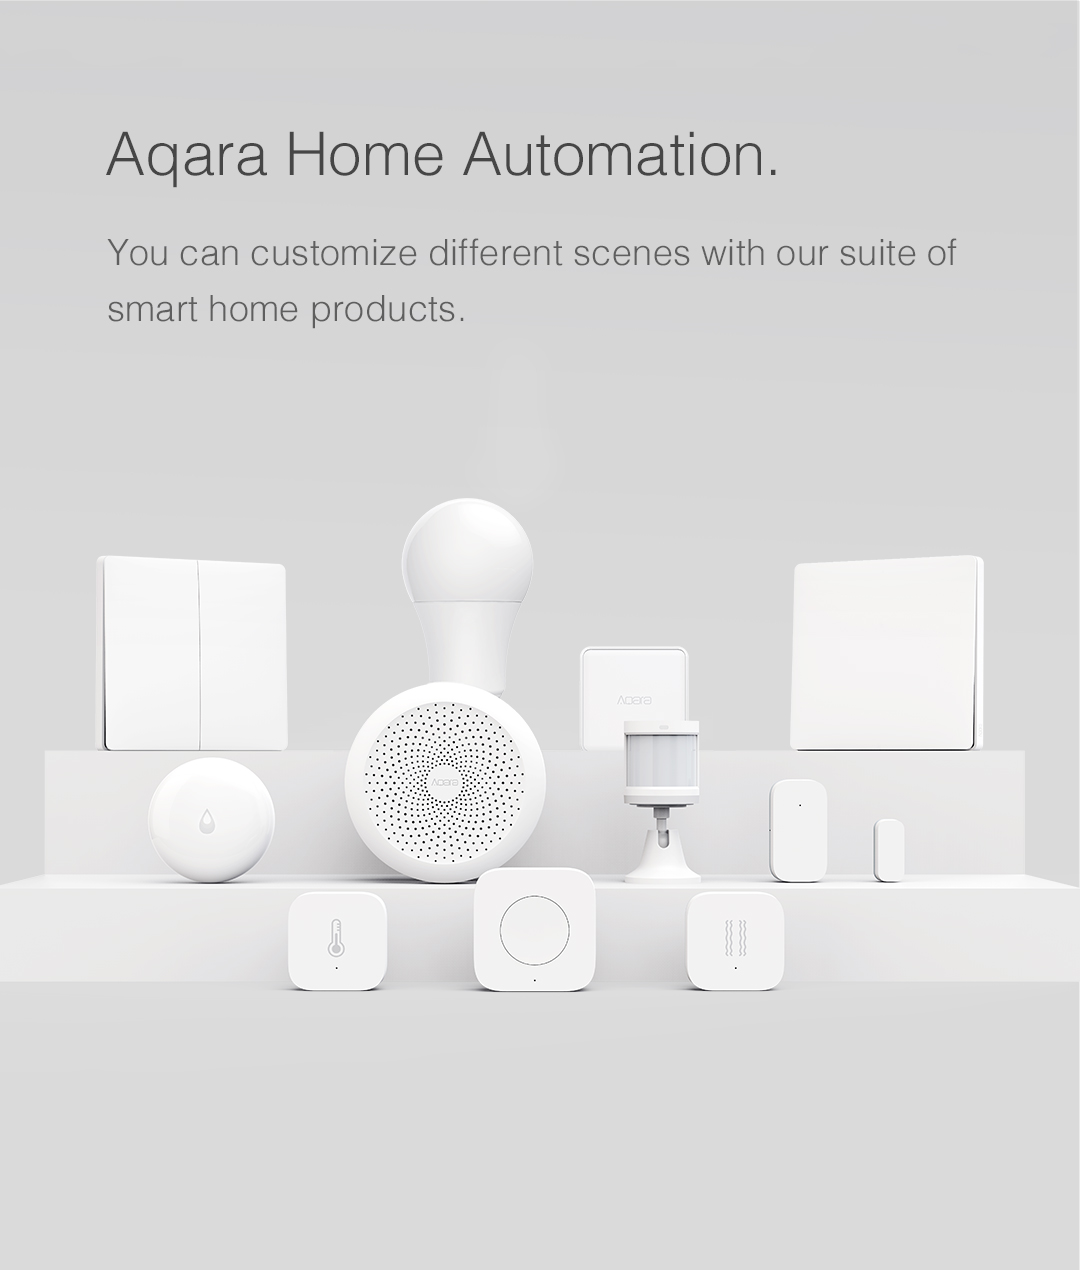 Full range of smart home devices from Aqara